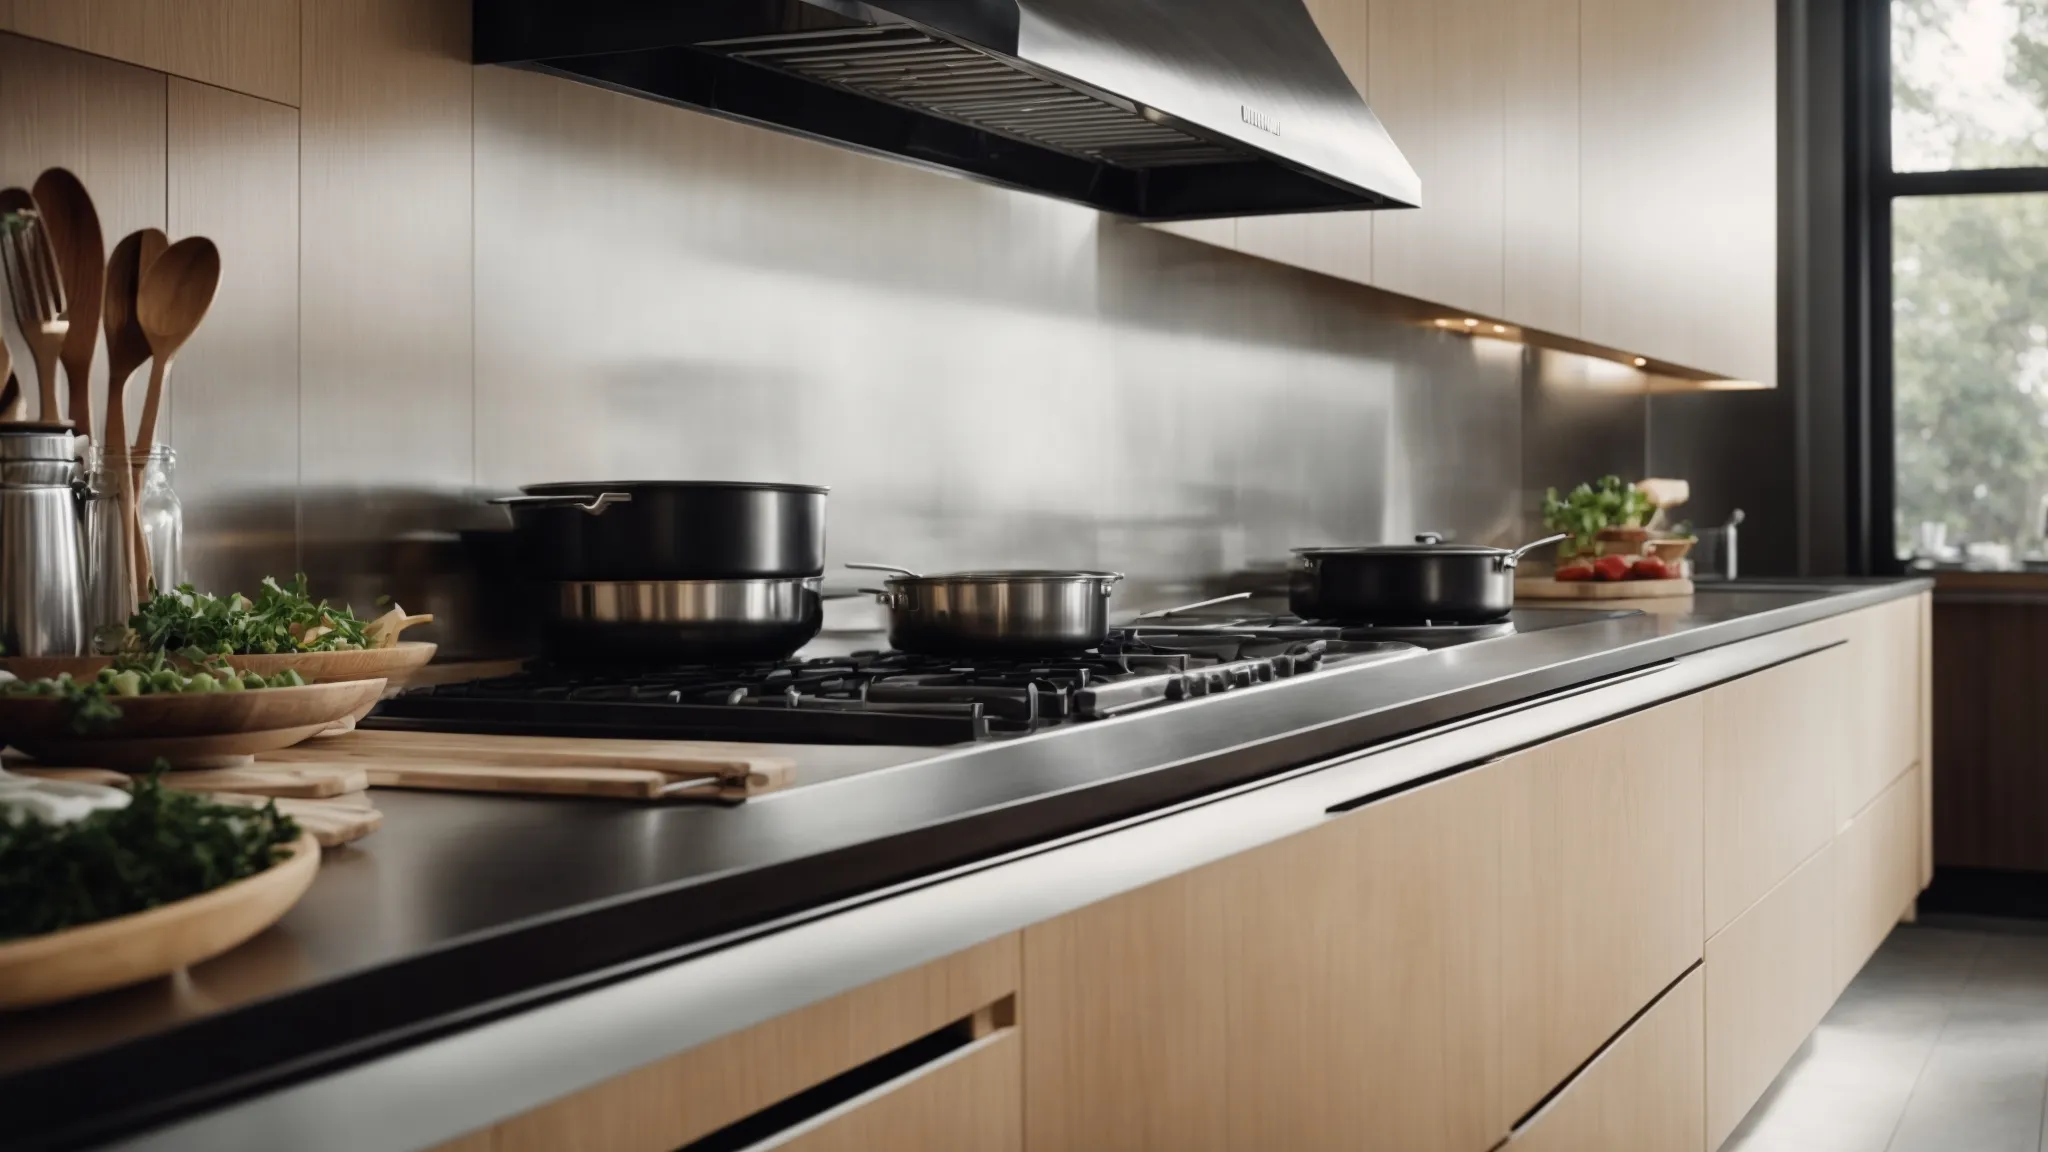 a sparkling clean kitchen hood gleaming above a stove in a tidy kitchen.